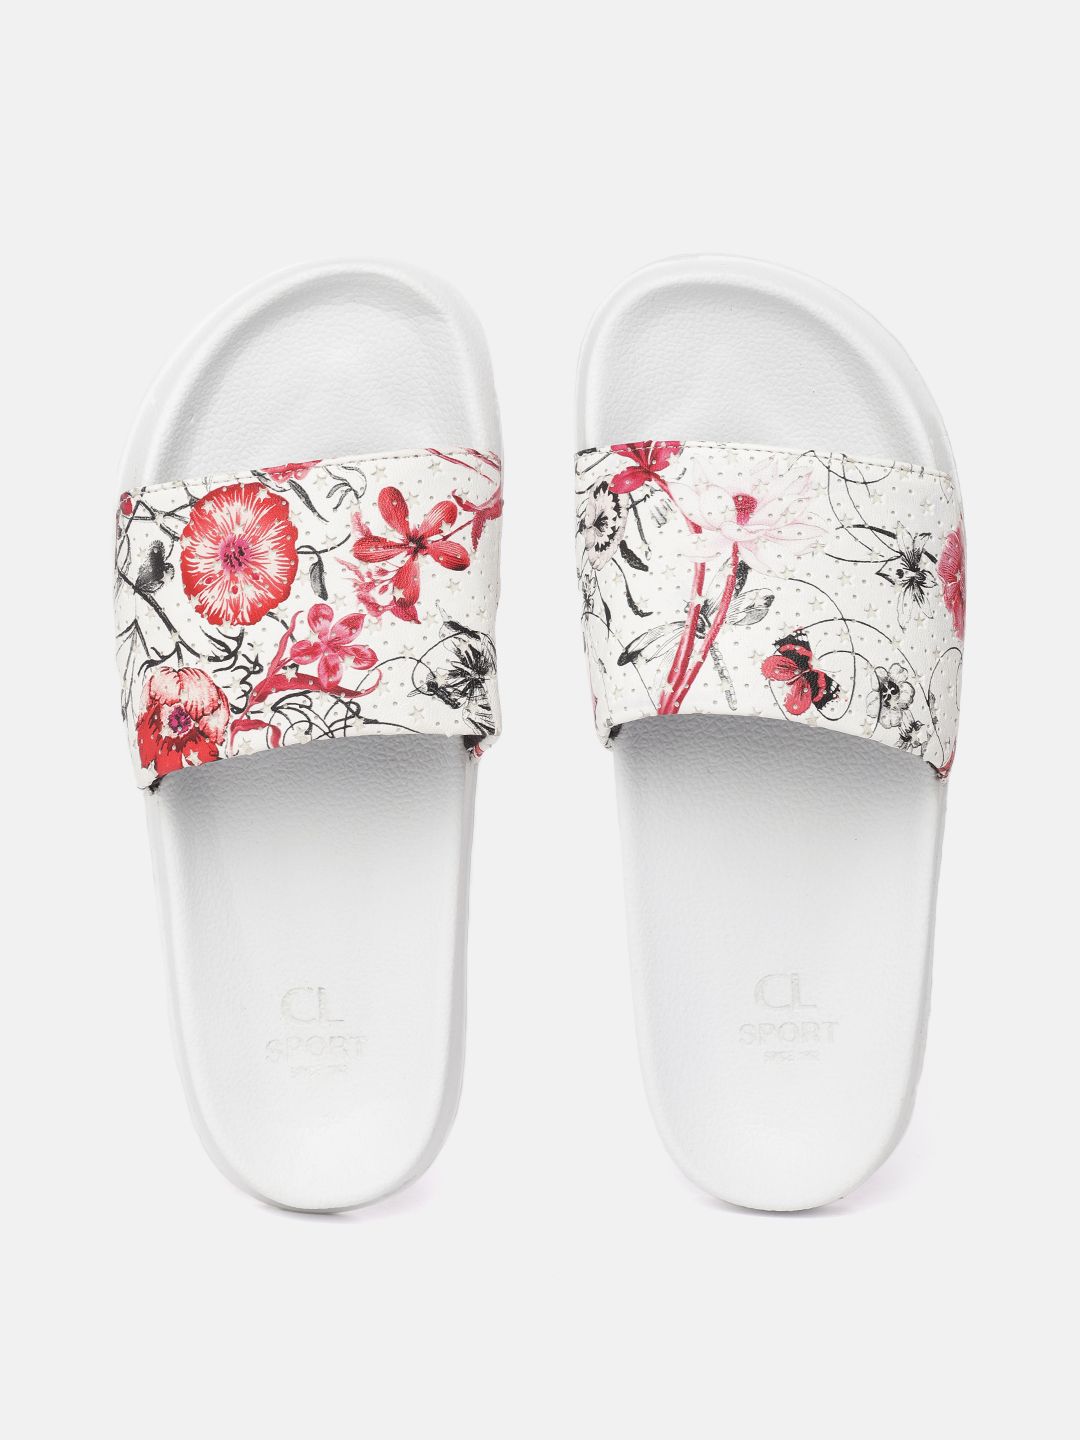 Carlton London sports Women White & Red Floral Print Perforated Sliders Price in India